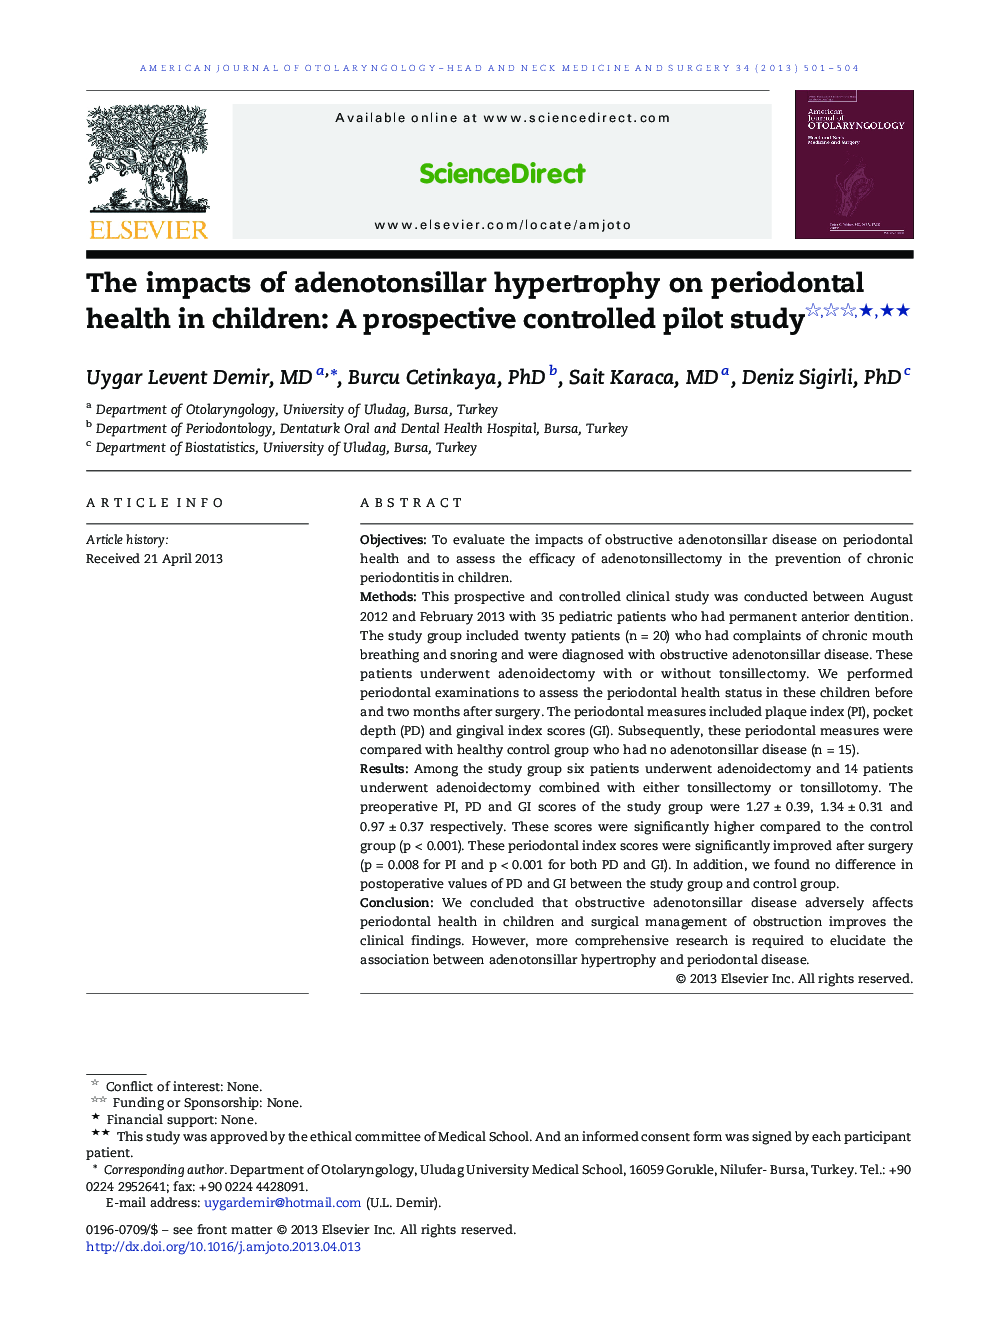 The impacts of adenotonsillar hypertrophy on periodontal health in children: A prospective controlled pilot study ★★★